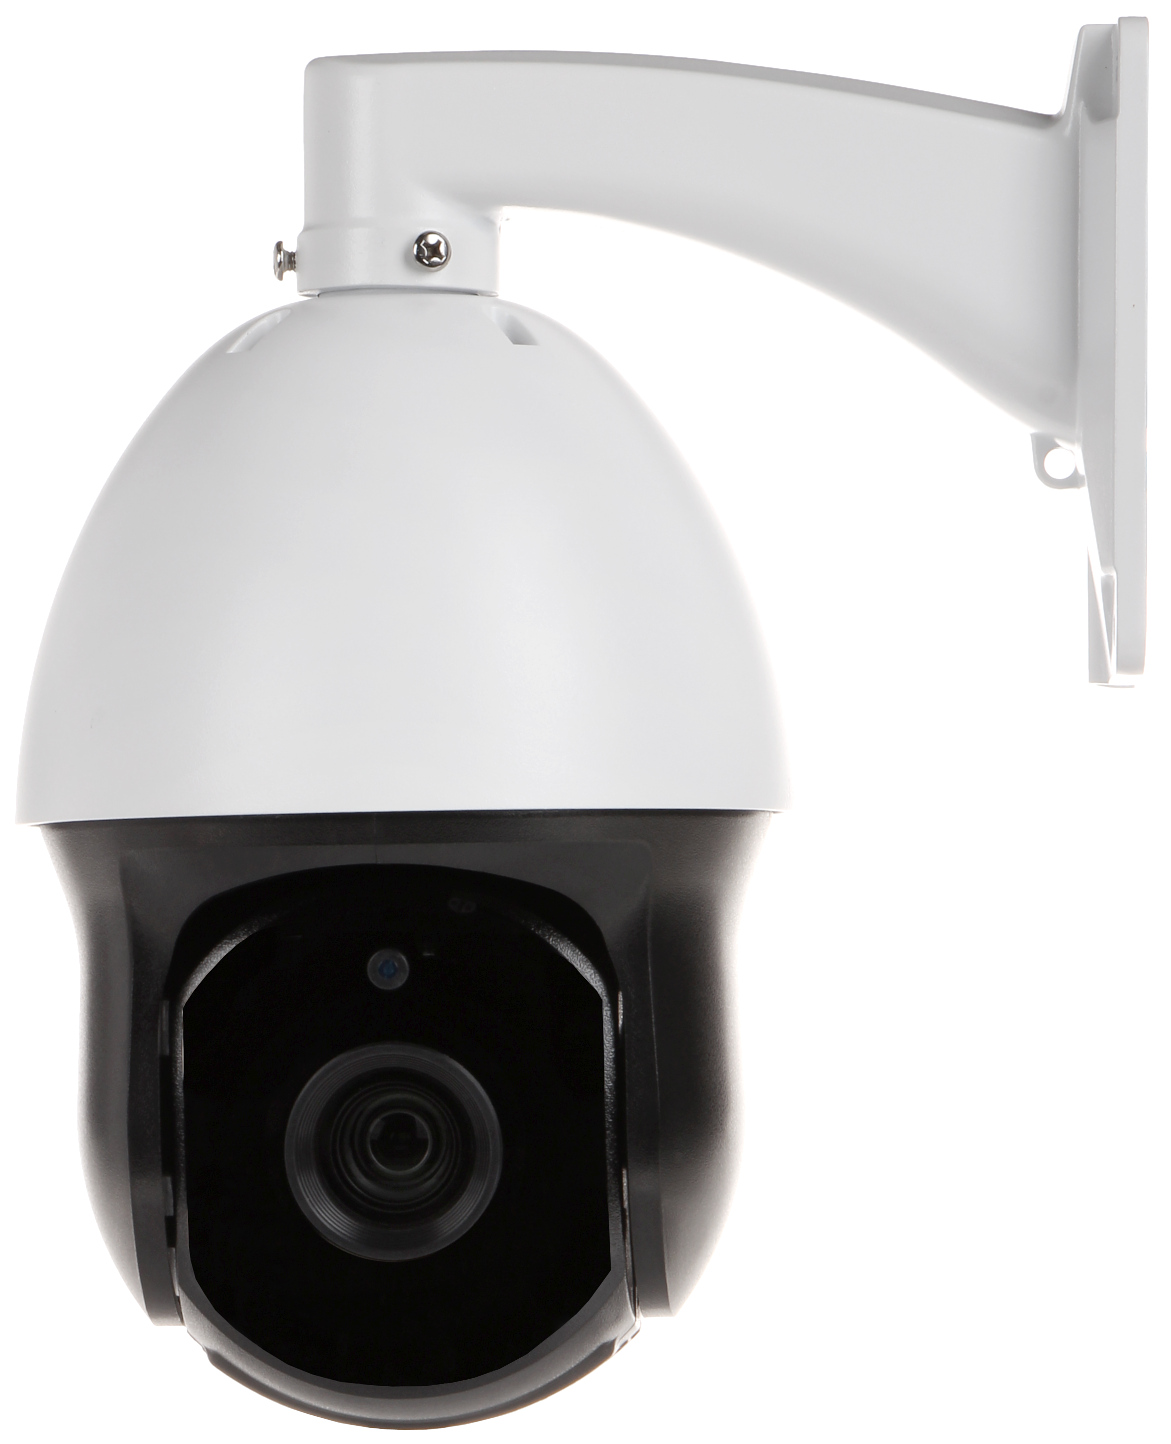 IP SPEED DOME CAMERA OUTDOOR OMEGA-51P22-18 - 5 Mpx 3.... - With an  illuminator range above 100 m - Delta